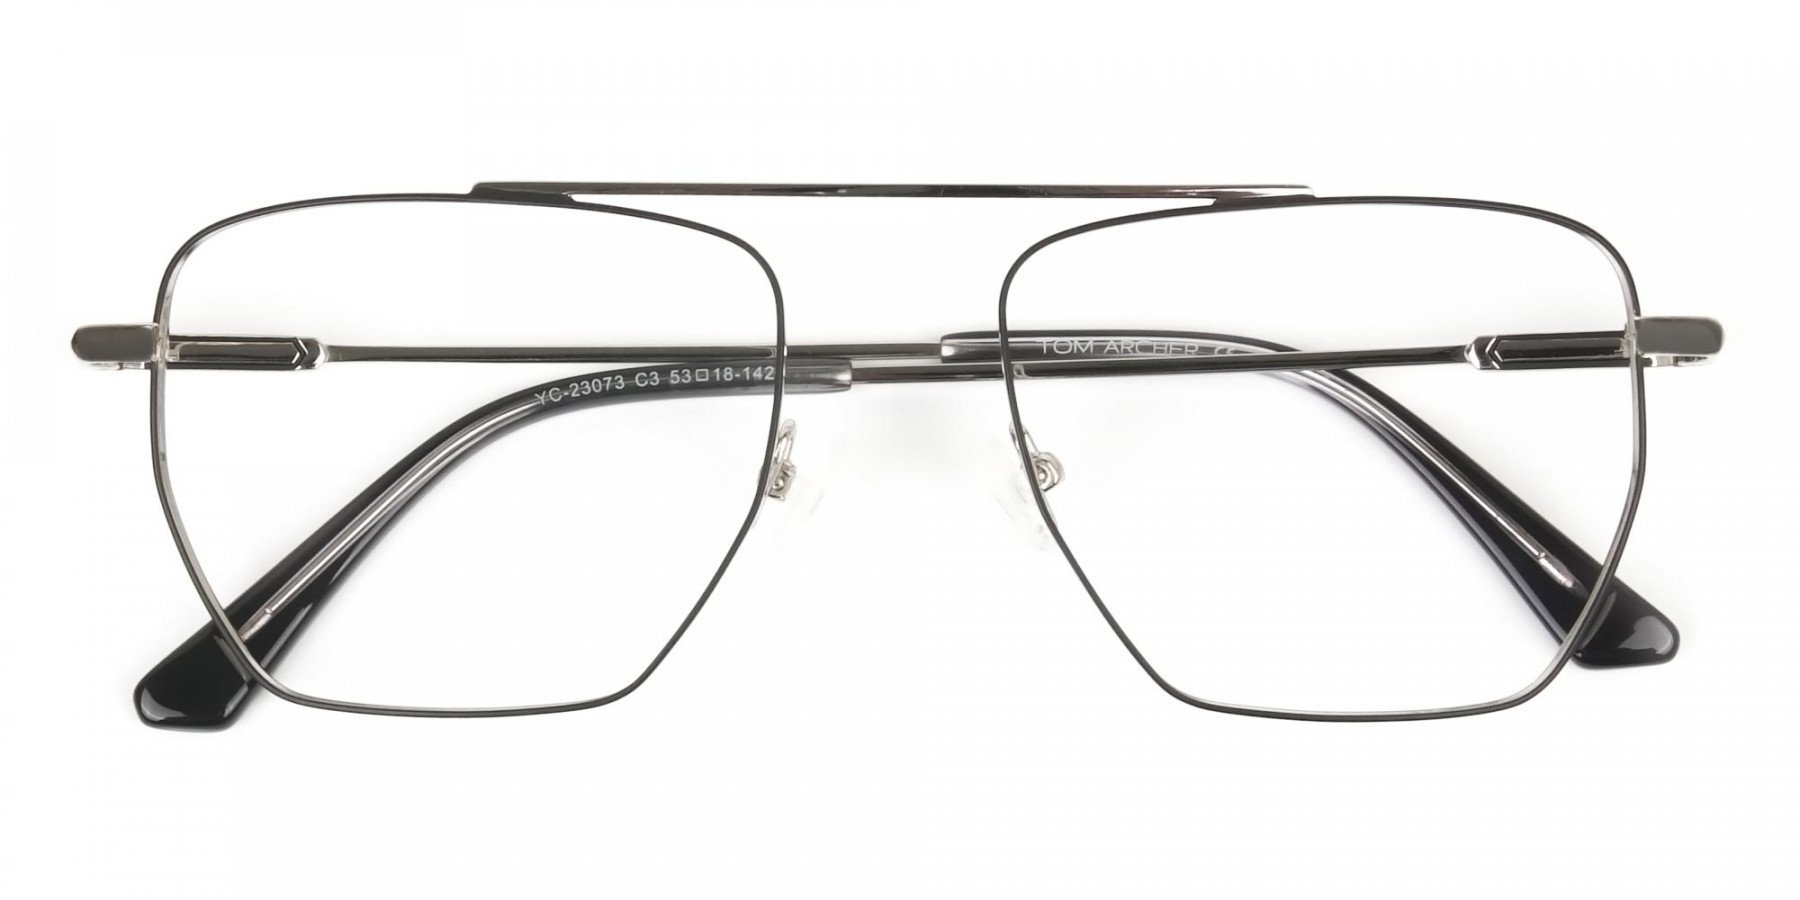 Lightweight Black and Silver Wire Frame Glasses Men Women - 1